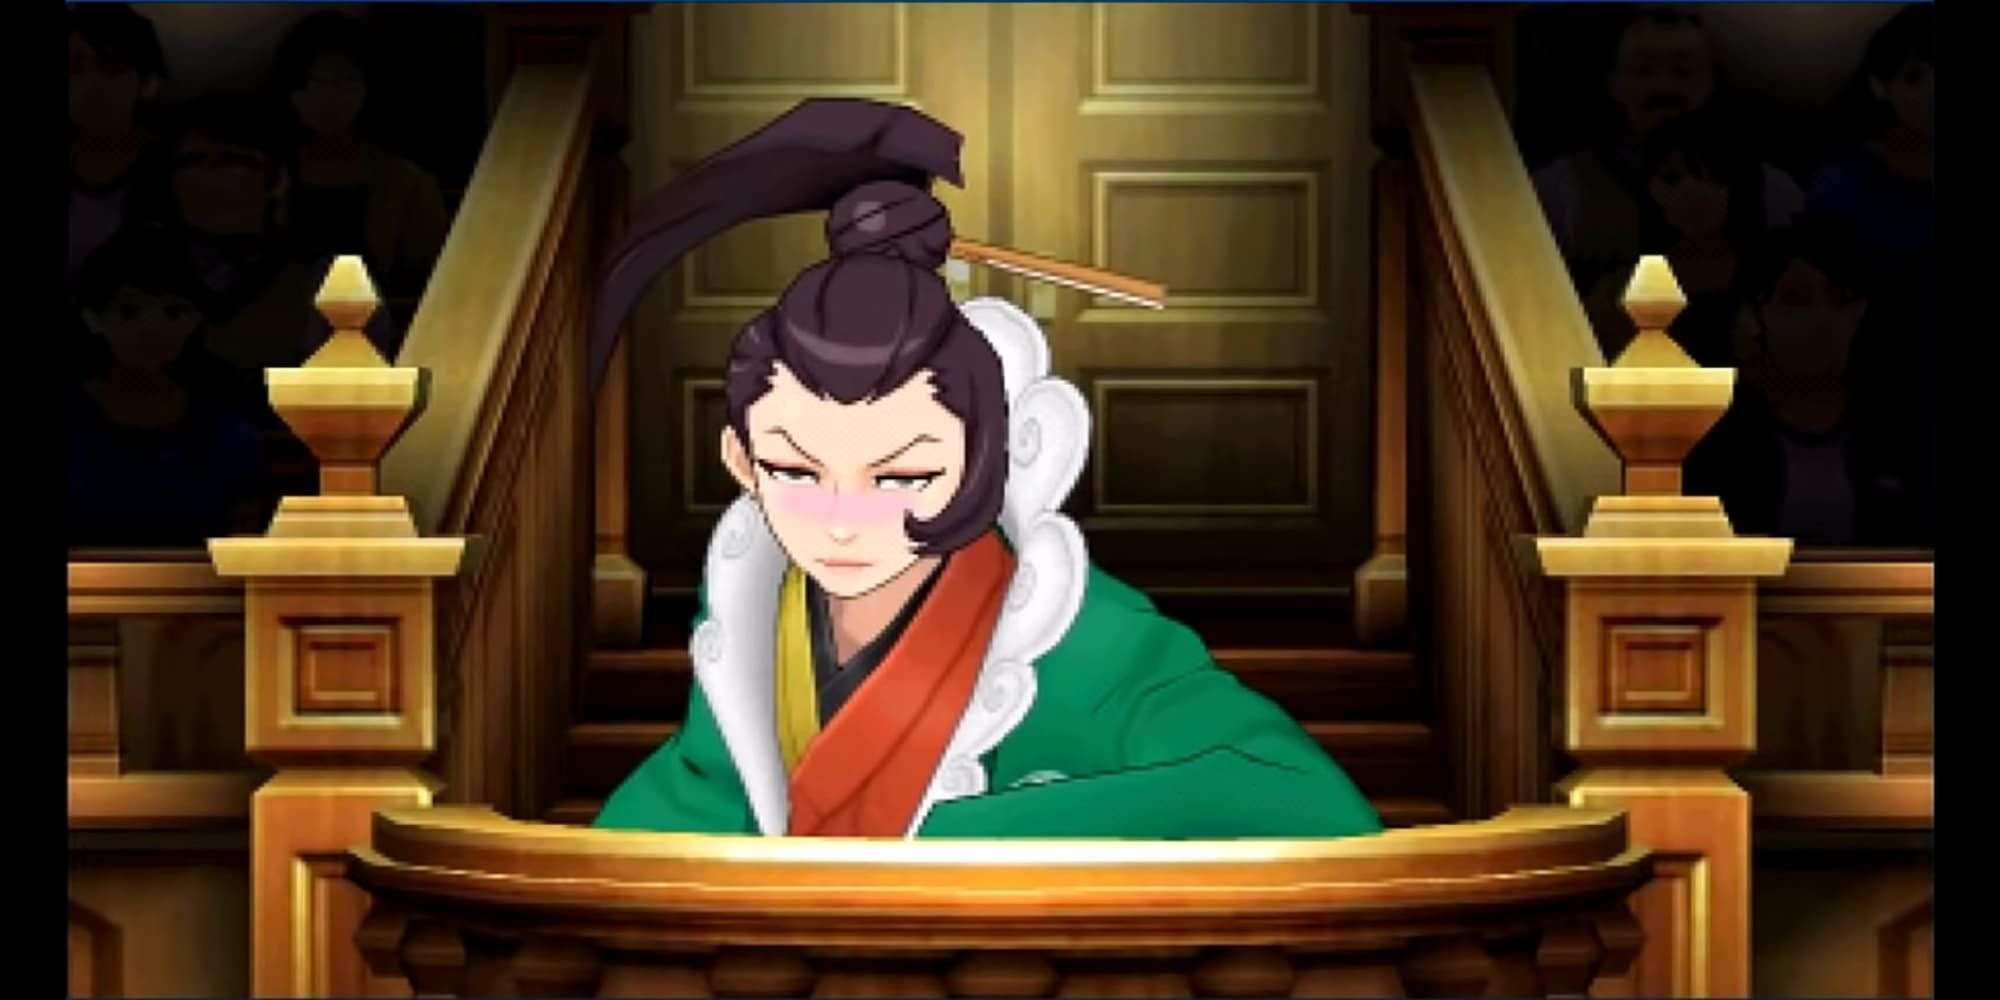 Ace Attorney Uendo Kisegawa alter at witness stand in court wearing red yellow and green kimono with dark hair tied up drunk and staring at camerca